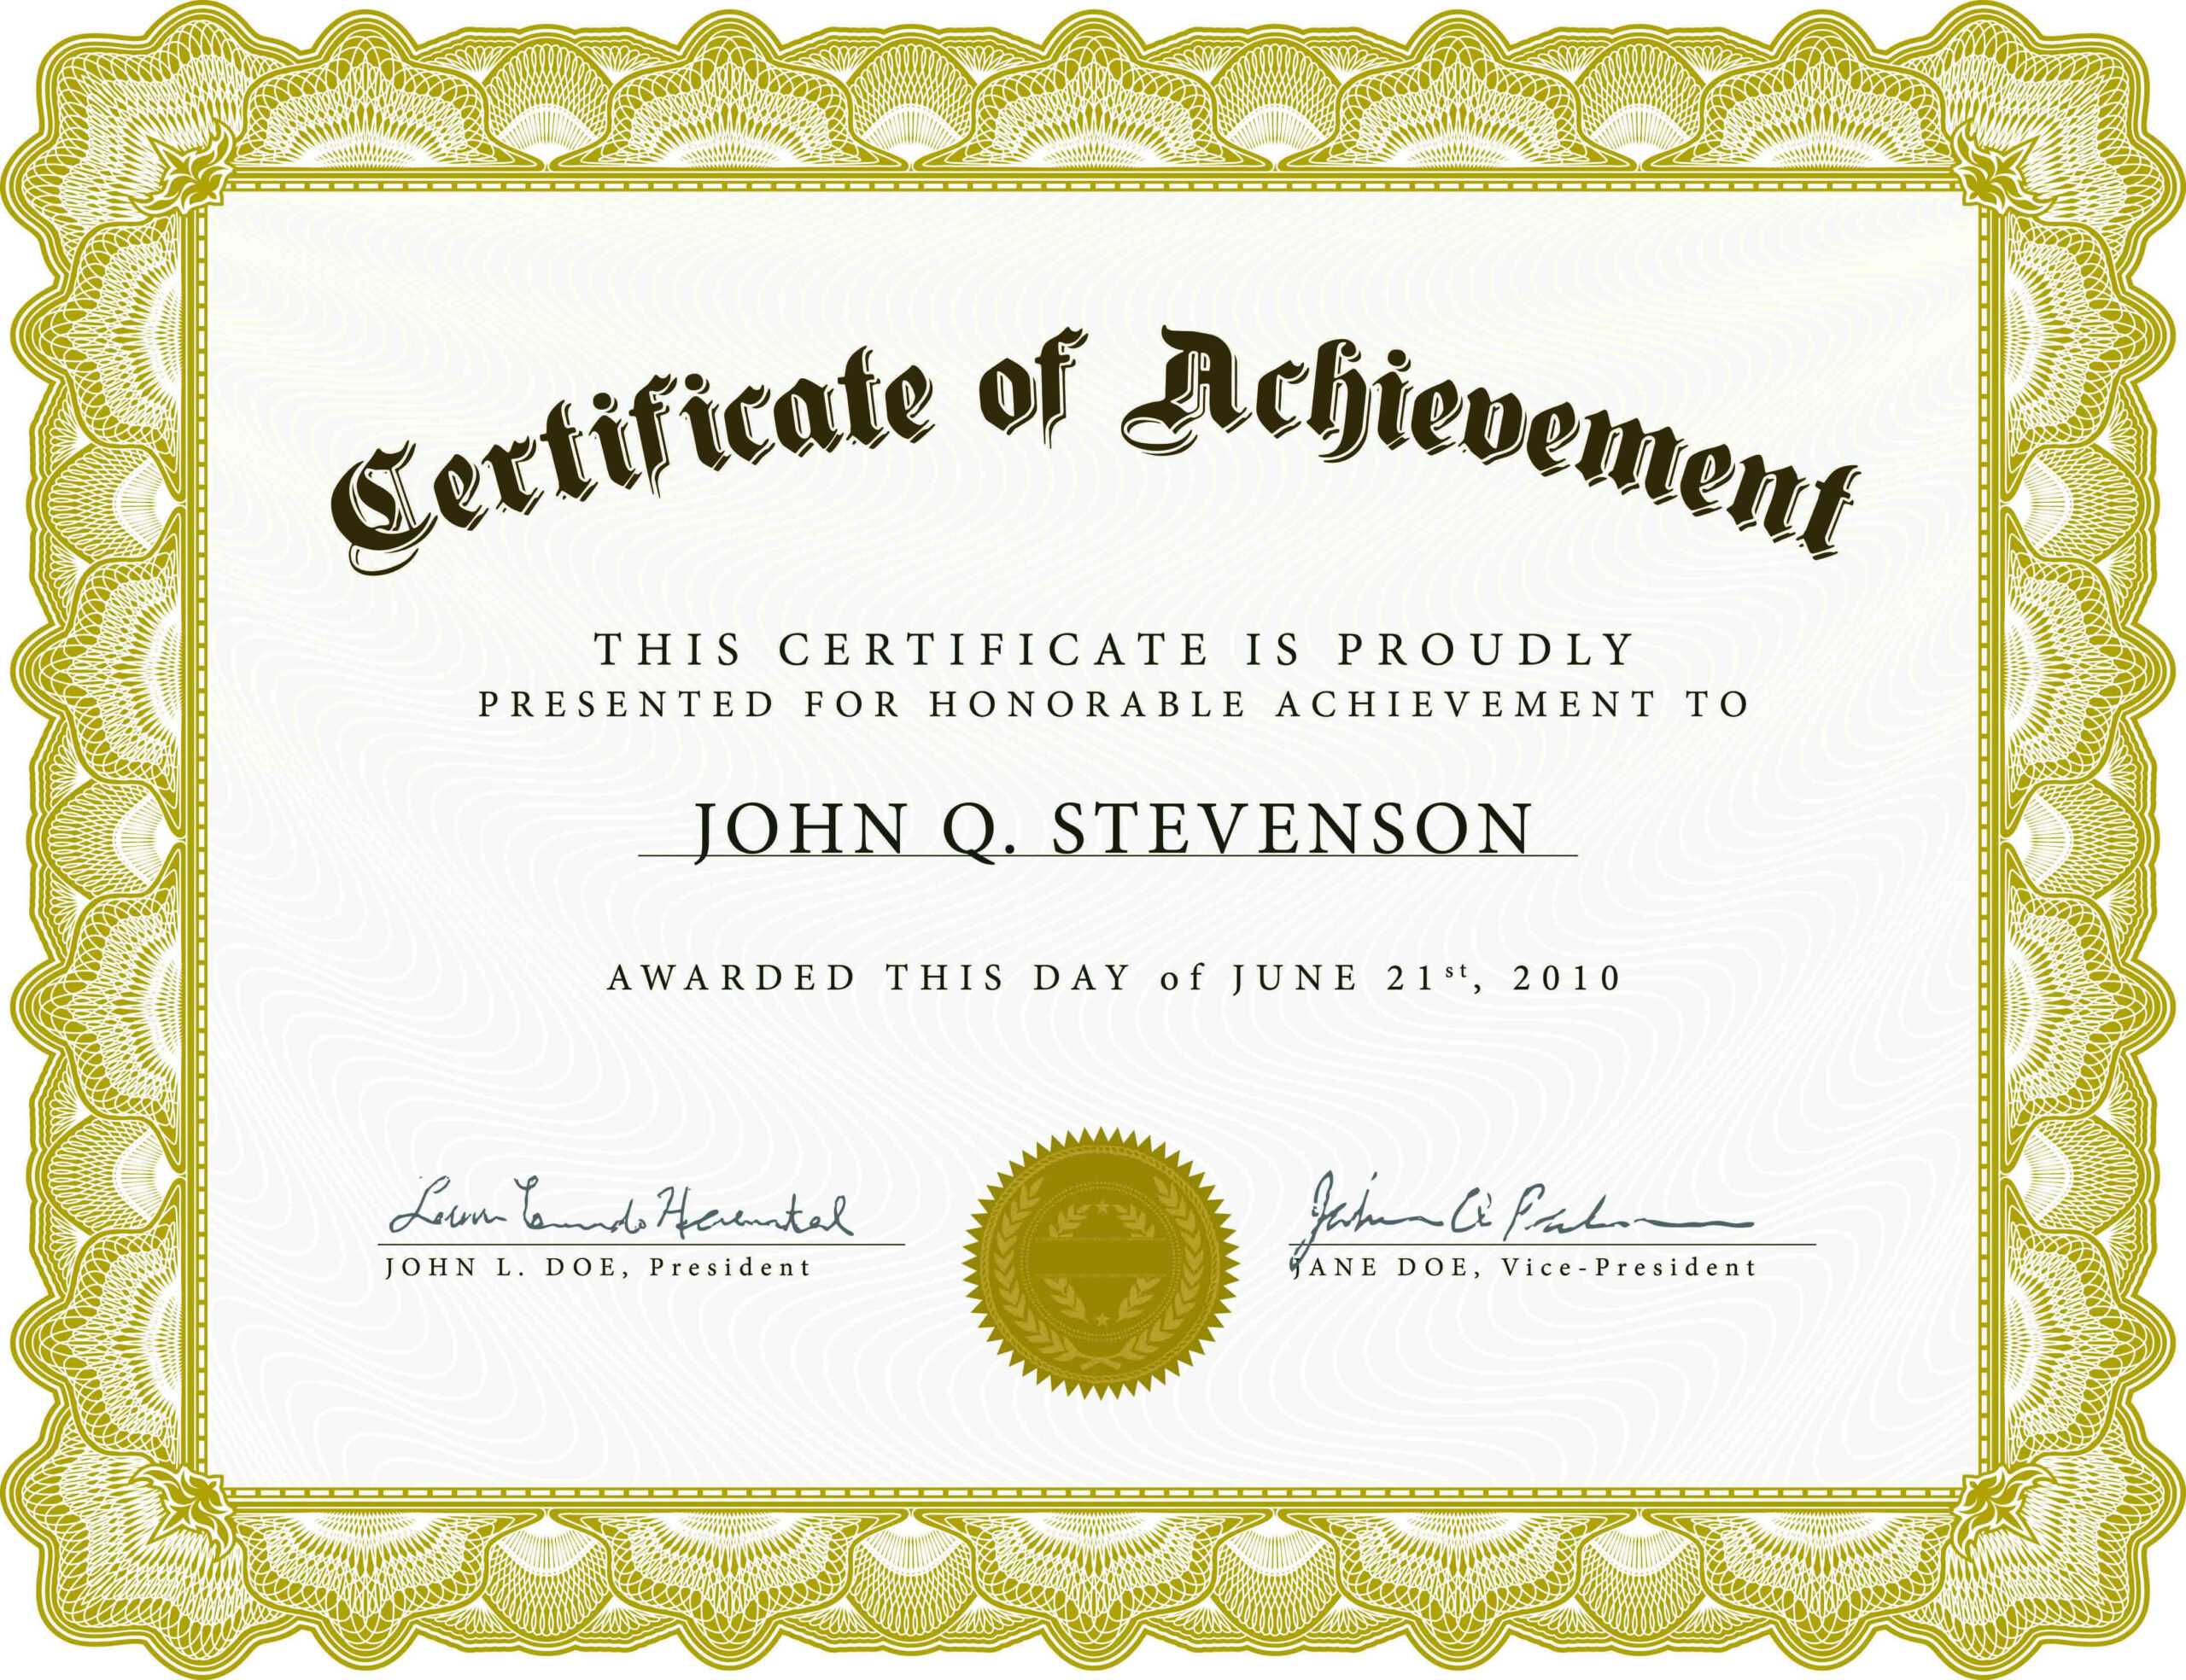 002 Word Certificate Of Achievement Template Outstanding Within Certificate Of Achievement Army Template